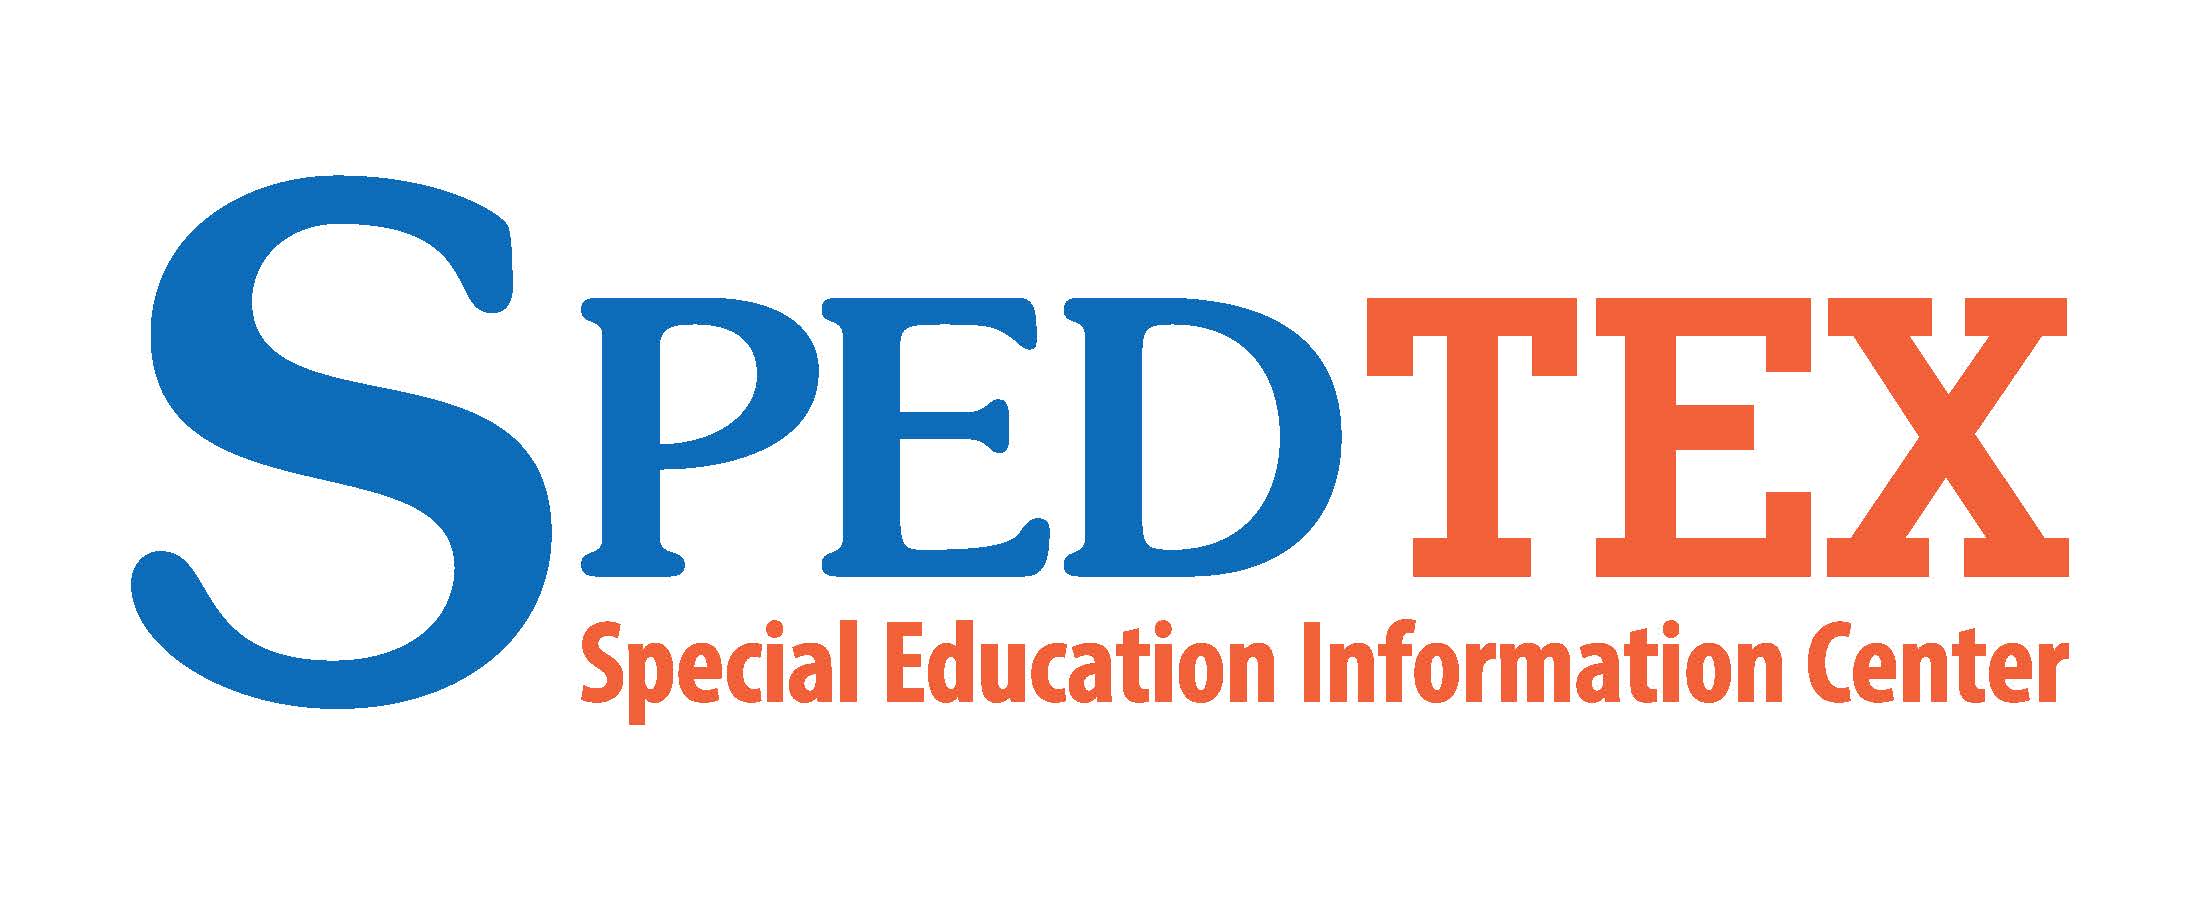 Picture of SpedTex logo which is hyperlinked to the SpedTex website